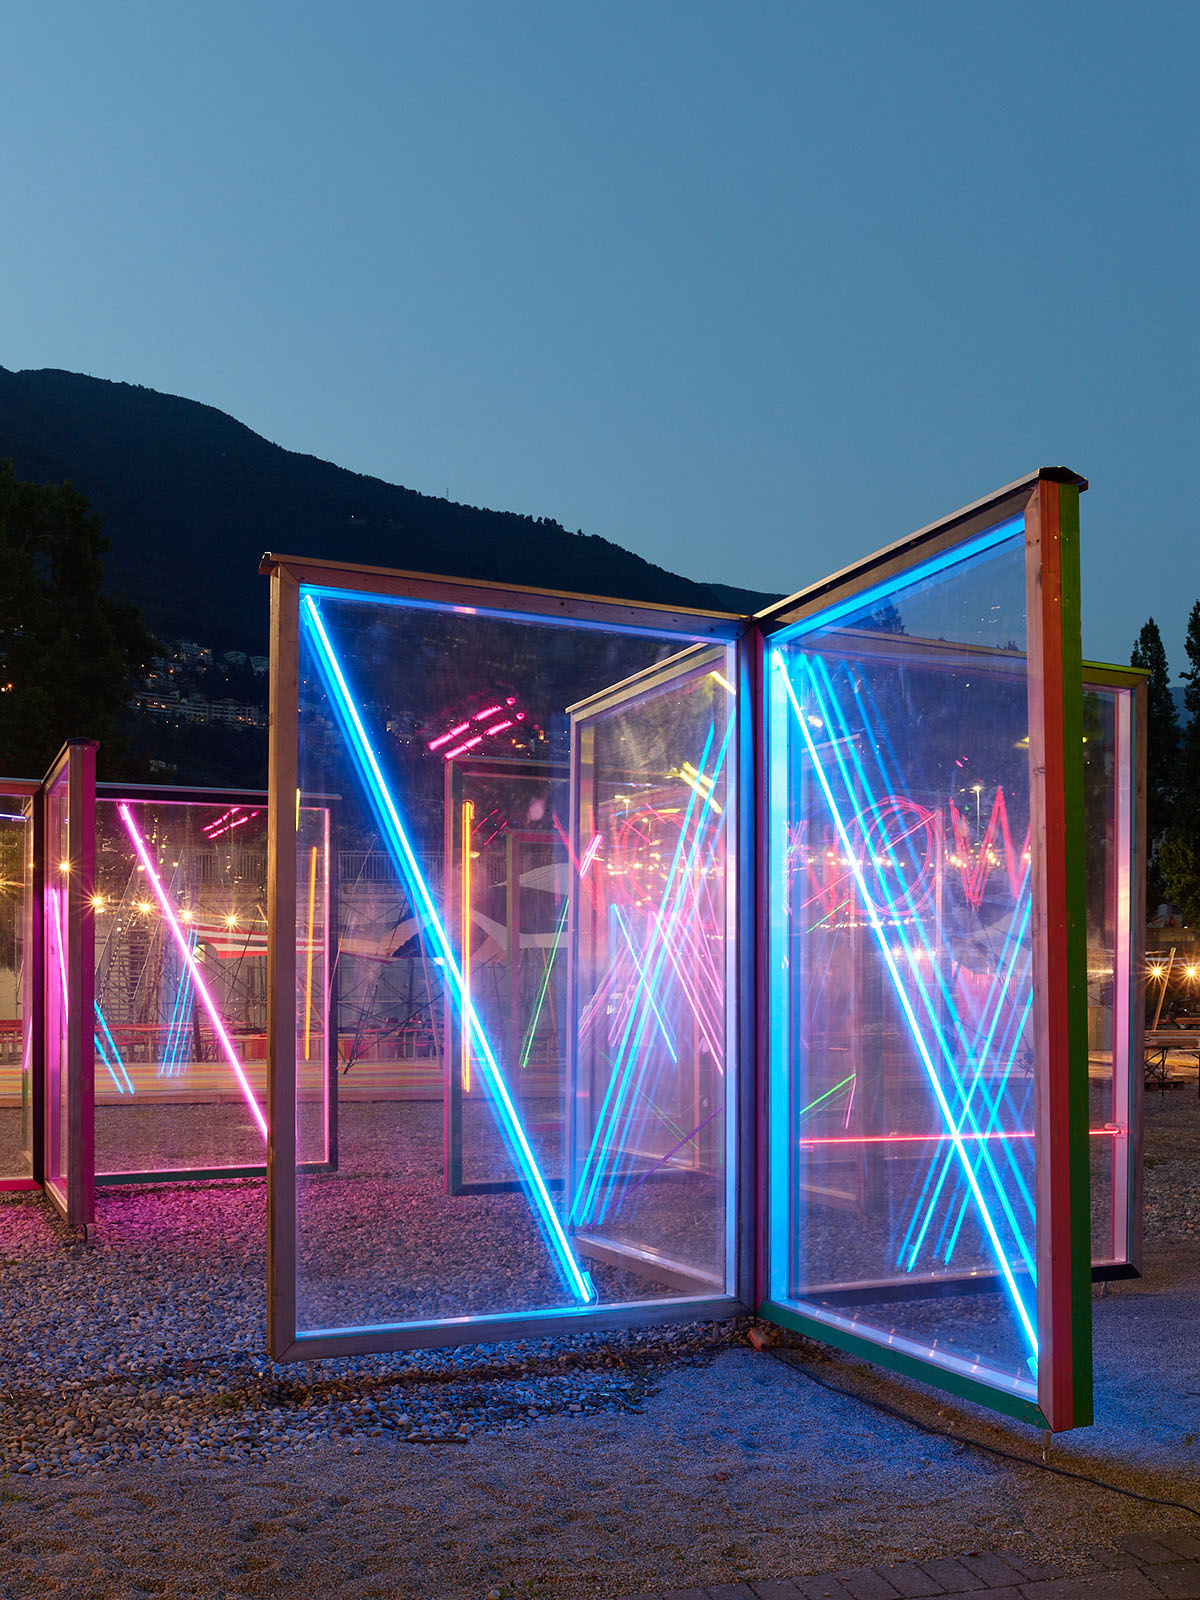 Kerim Seiler, Tender is the Night, 2020, installation for the Locarno Together is in the immediate vicinity of the Film Festival 2021, in Switzerland. Photograph by Ariel Huber.